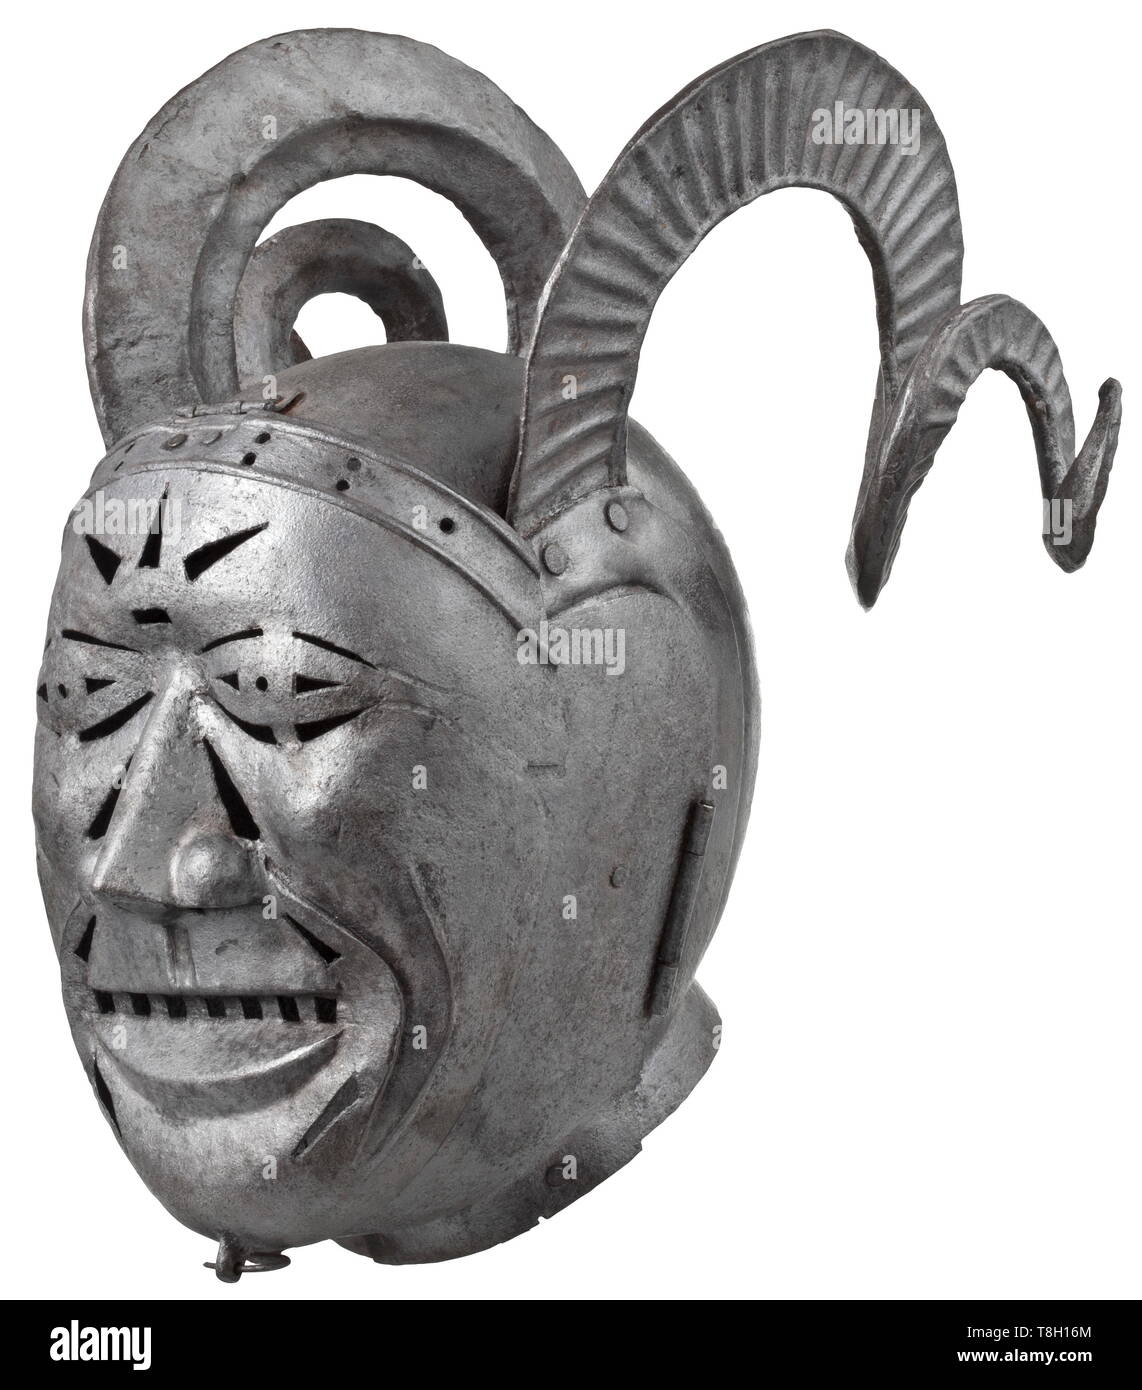 A mask of shame, or brank - collector's reproduction in the style of the 16th century Two-piece iron skull with riveted, spiral-shaped ram's horns. Laterally hinged two-piece bevor. Hinged, geometrically pierced visor in the shape of a face. Somewhat corroded with dark patina. Height ca. 40 cm. This piece was modelled on an armet housed in the Royal Armouries in Leeds today. The famous 'horned helmet' was made between 1511 and 1514 by the Innsbruck armourer Konrad Seusenhofer and was a present from Emperor Maximilian I to the English King Henry V, Additional-Rights-Clearance-Info-Not-Available Stock Photo